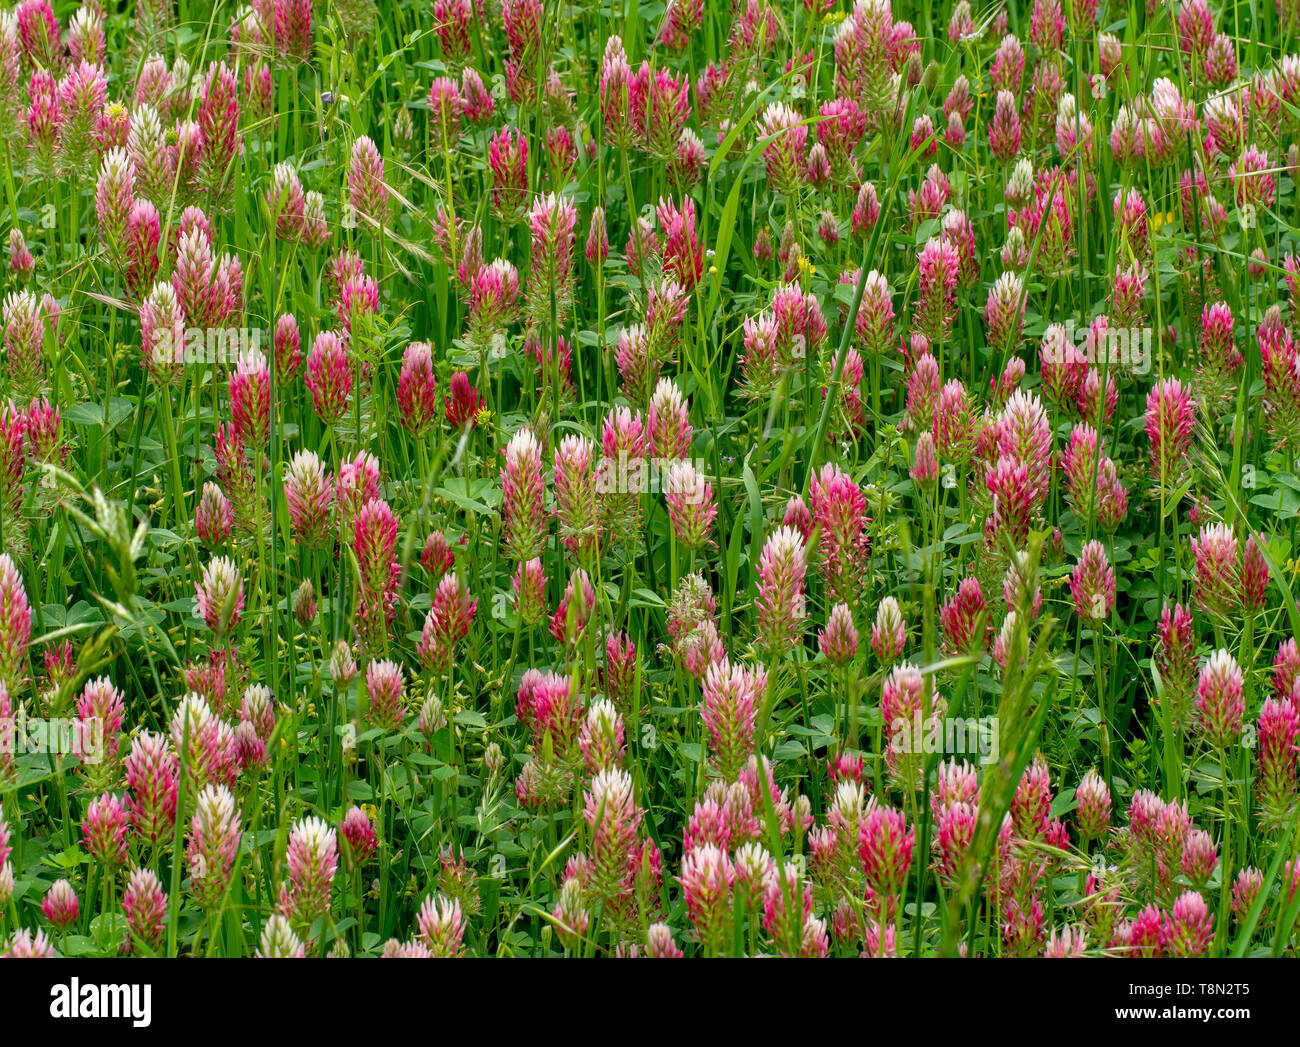 Red clover, trefoil in flower in field. Trifolium pratense, forage crop for pasturage, hay and green manure. Nitrogen fixer. Also medicinal. Stock Photo